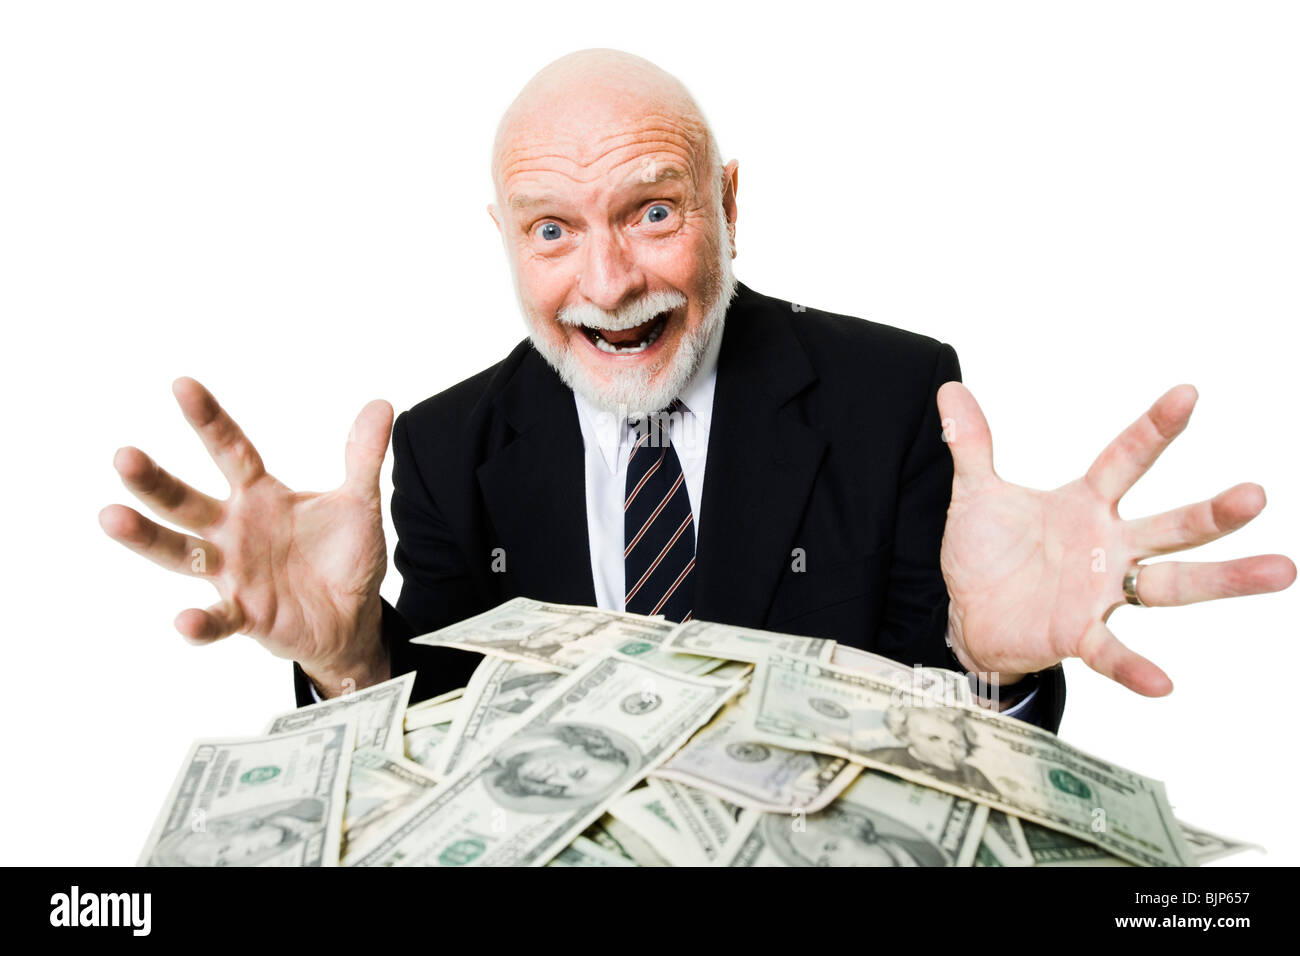 Closeup of businessman looking at pile of money Stock Photo